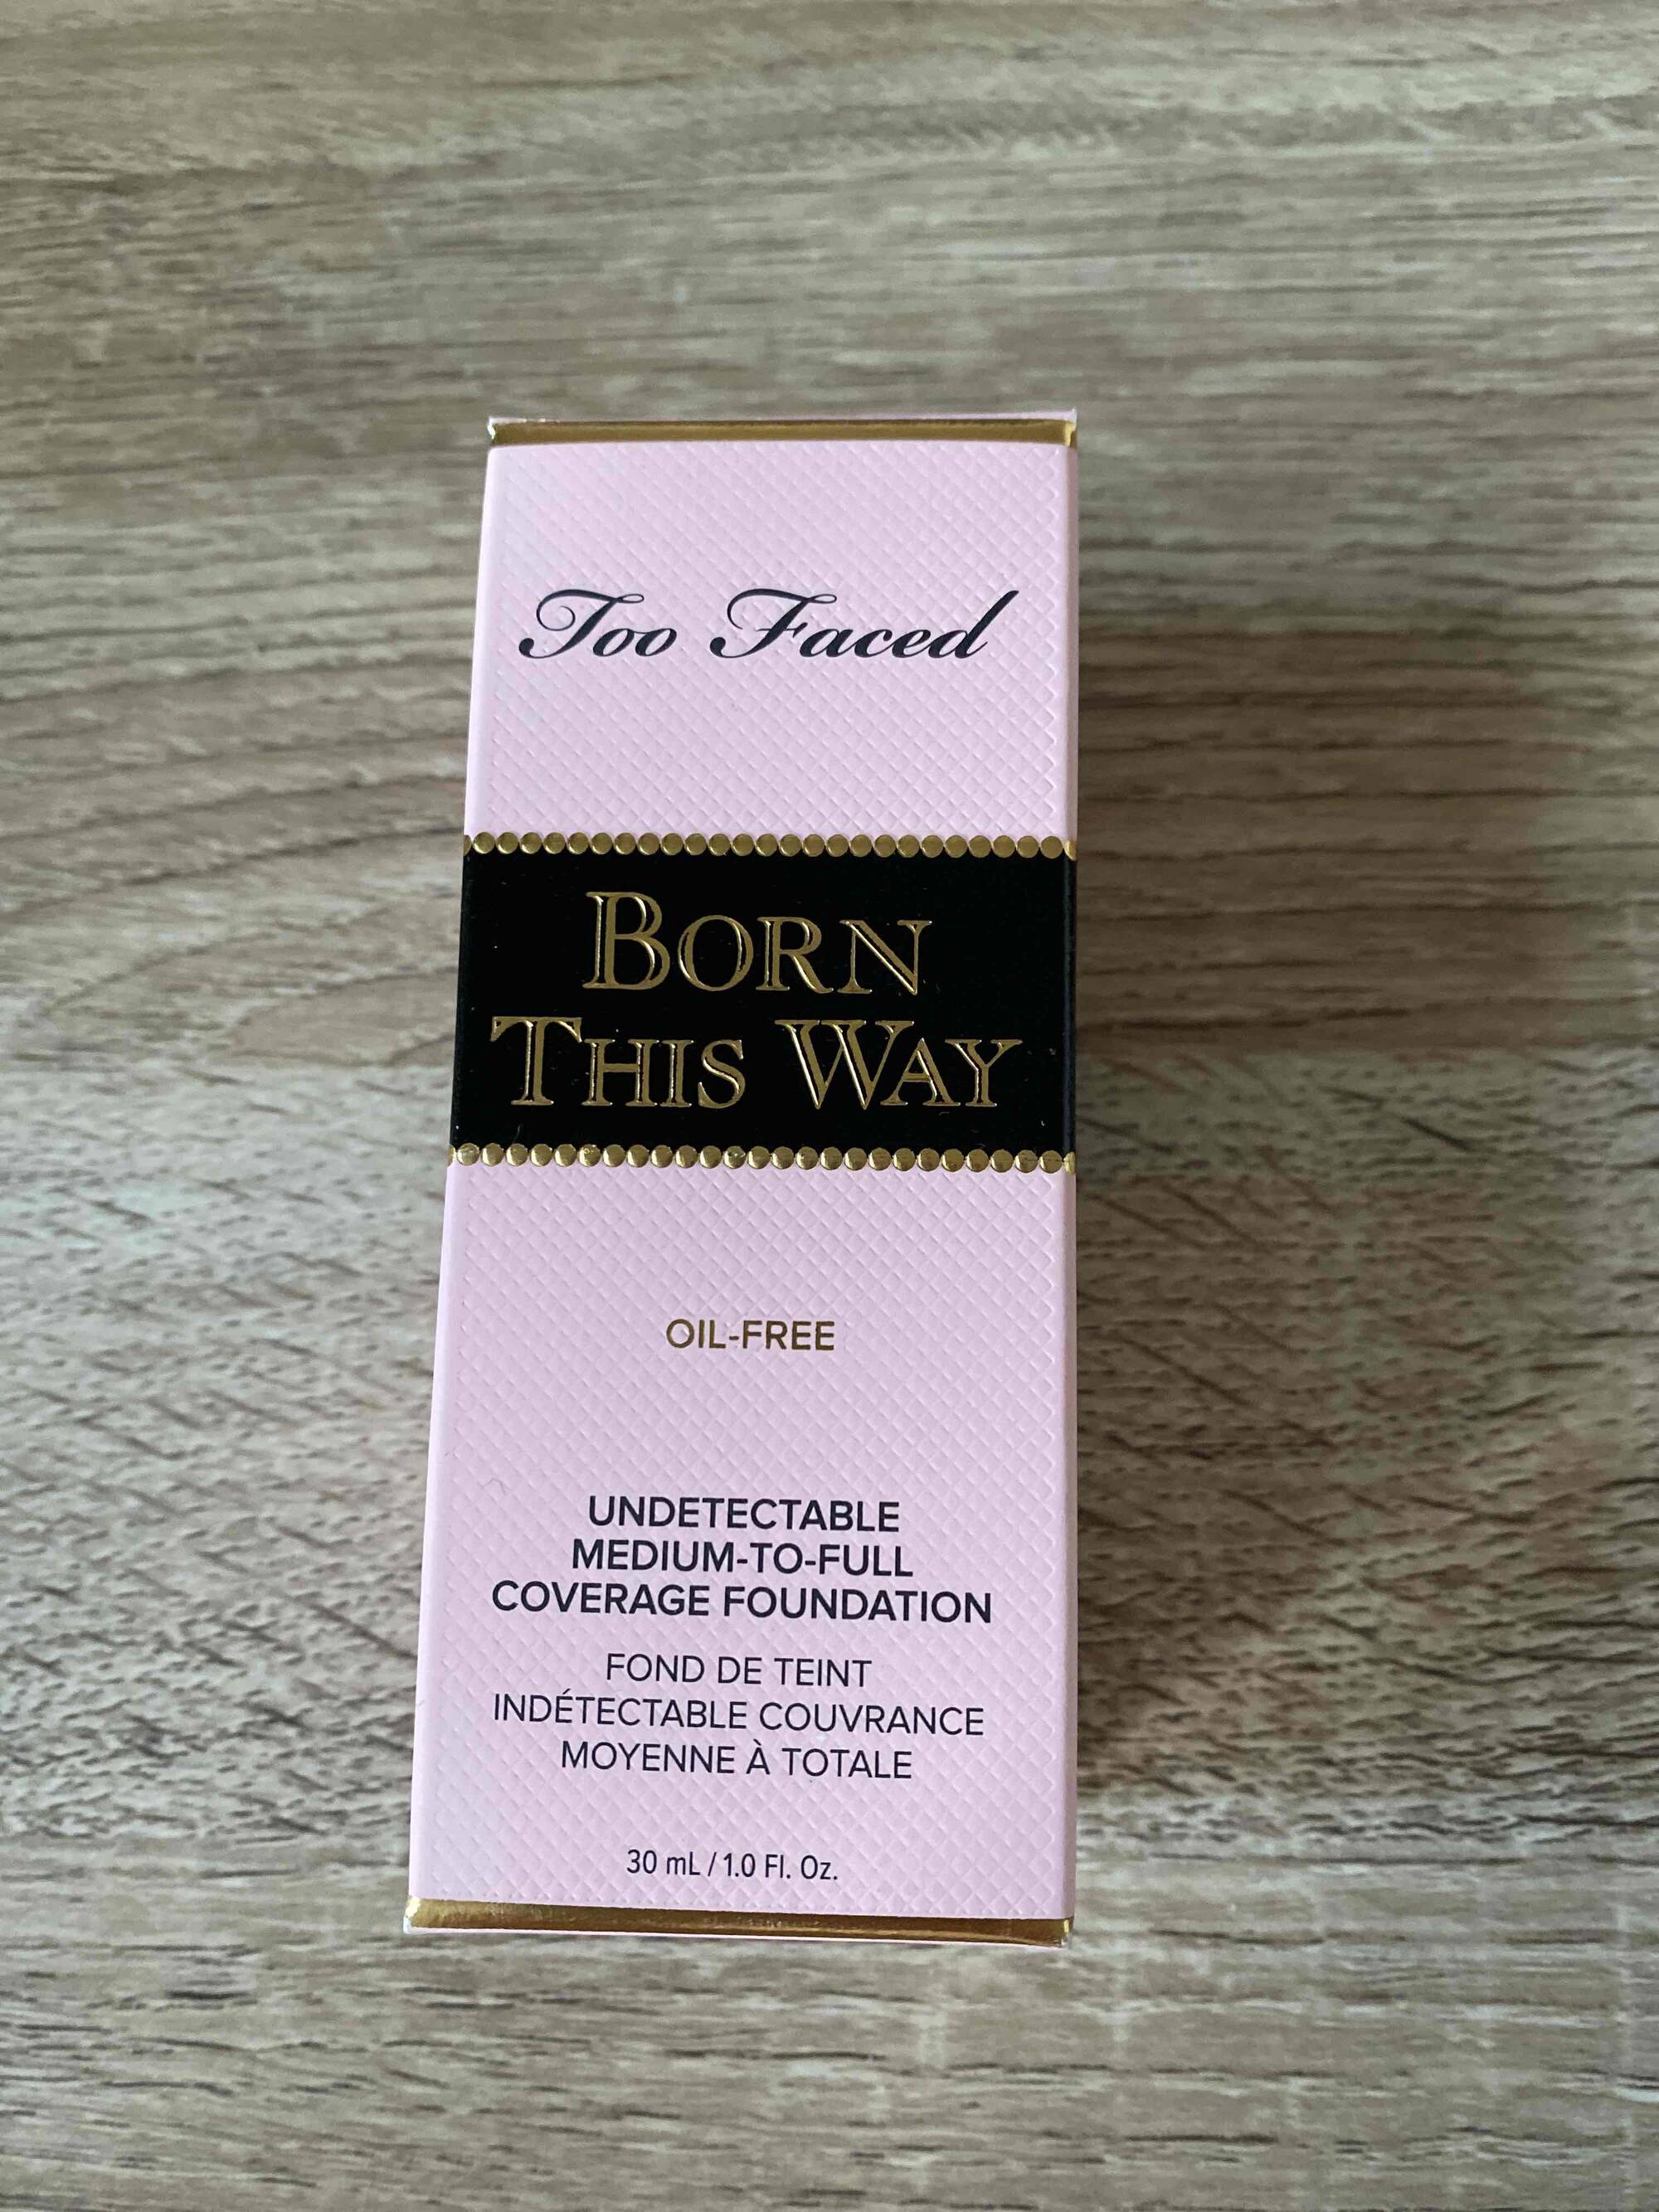 TOO FACED - Born this Way - Fond de teint indétectable couvrance